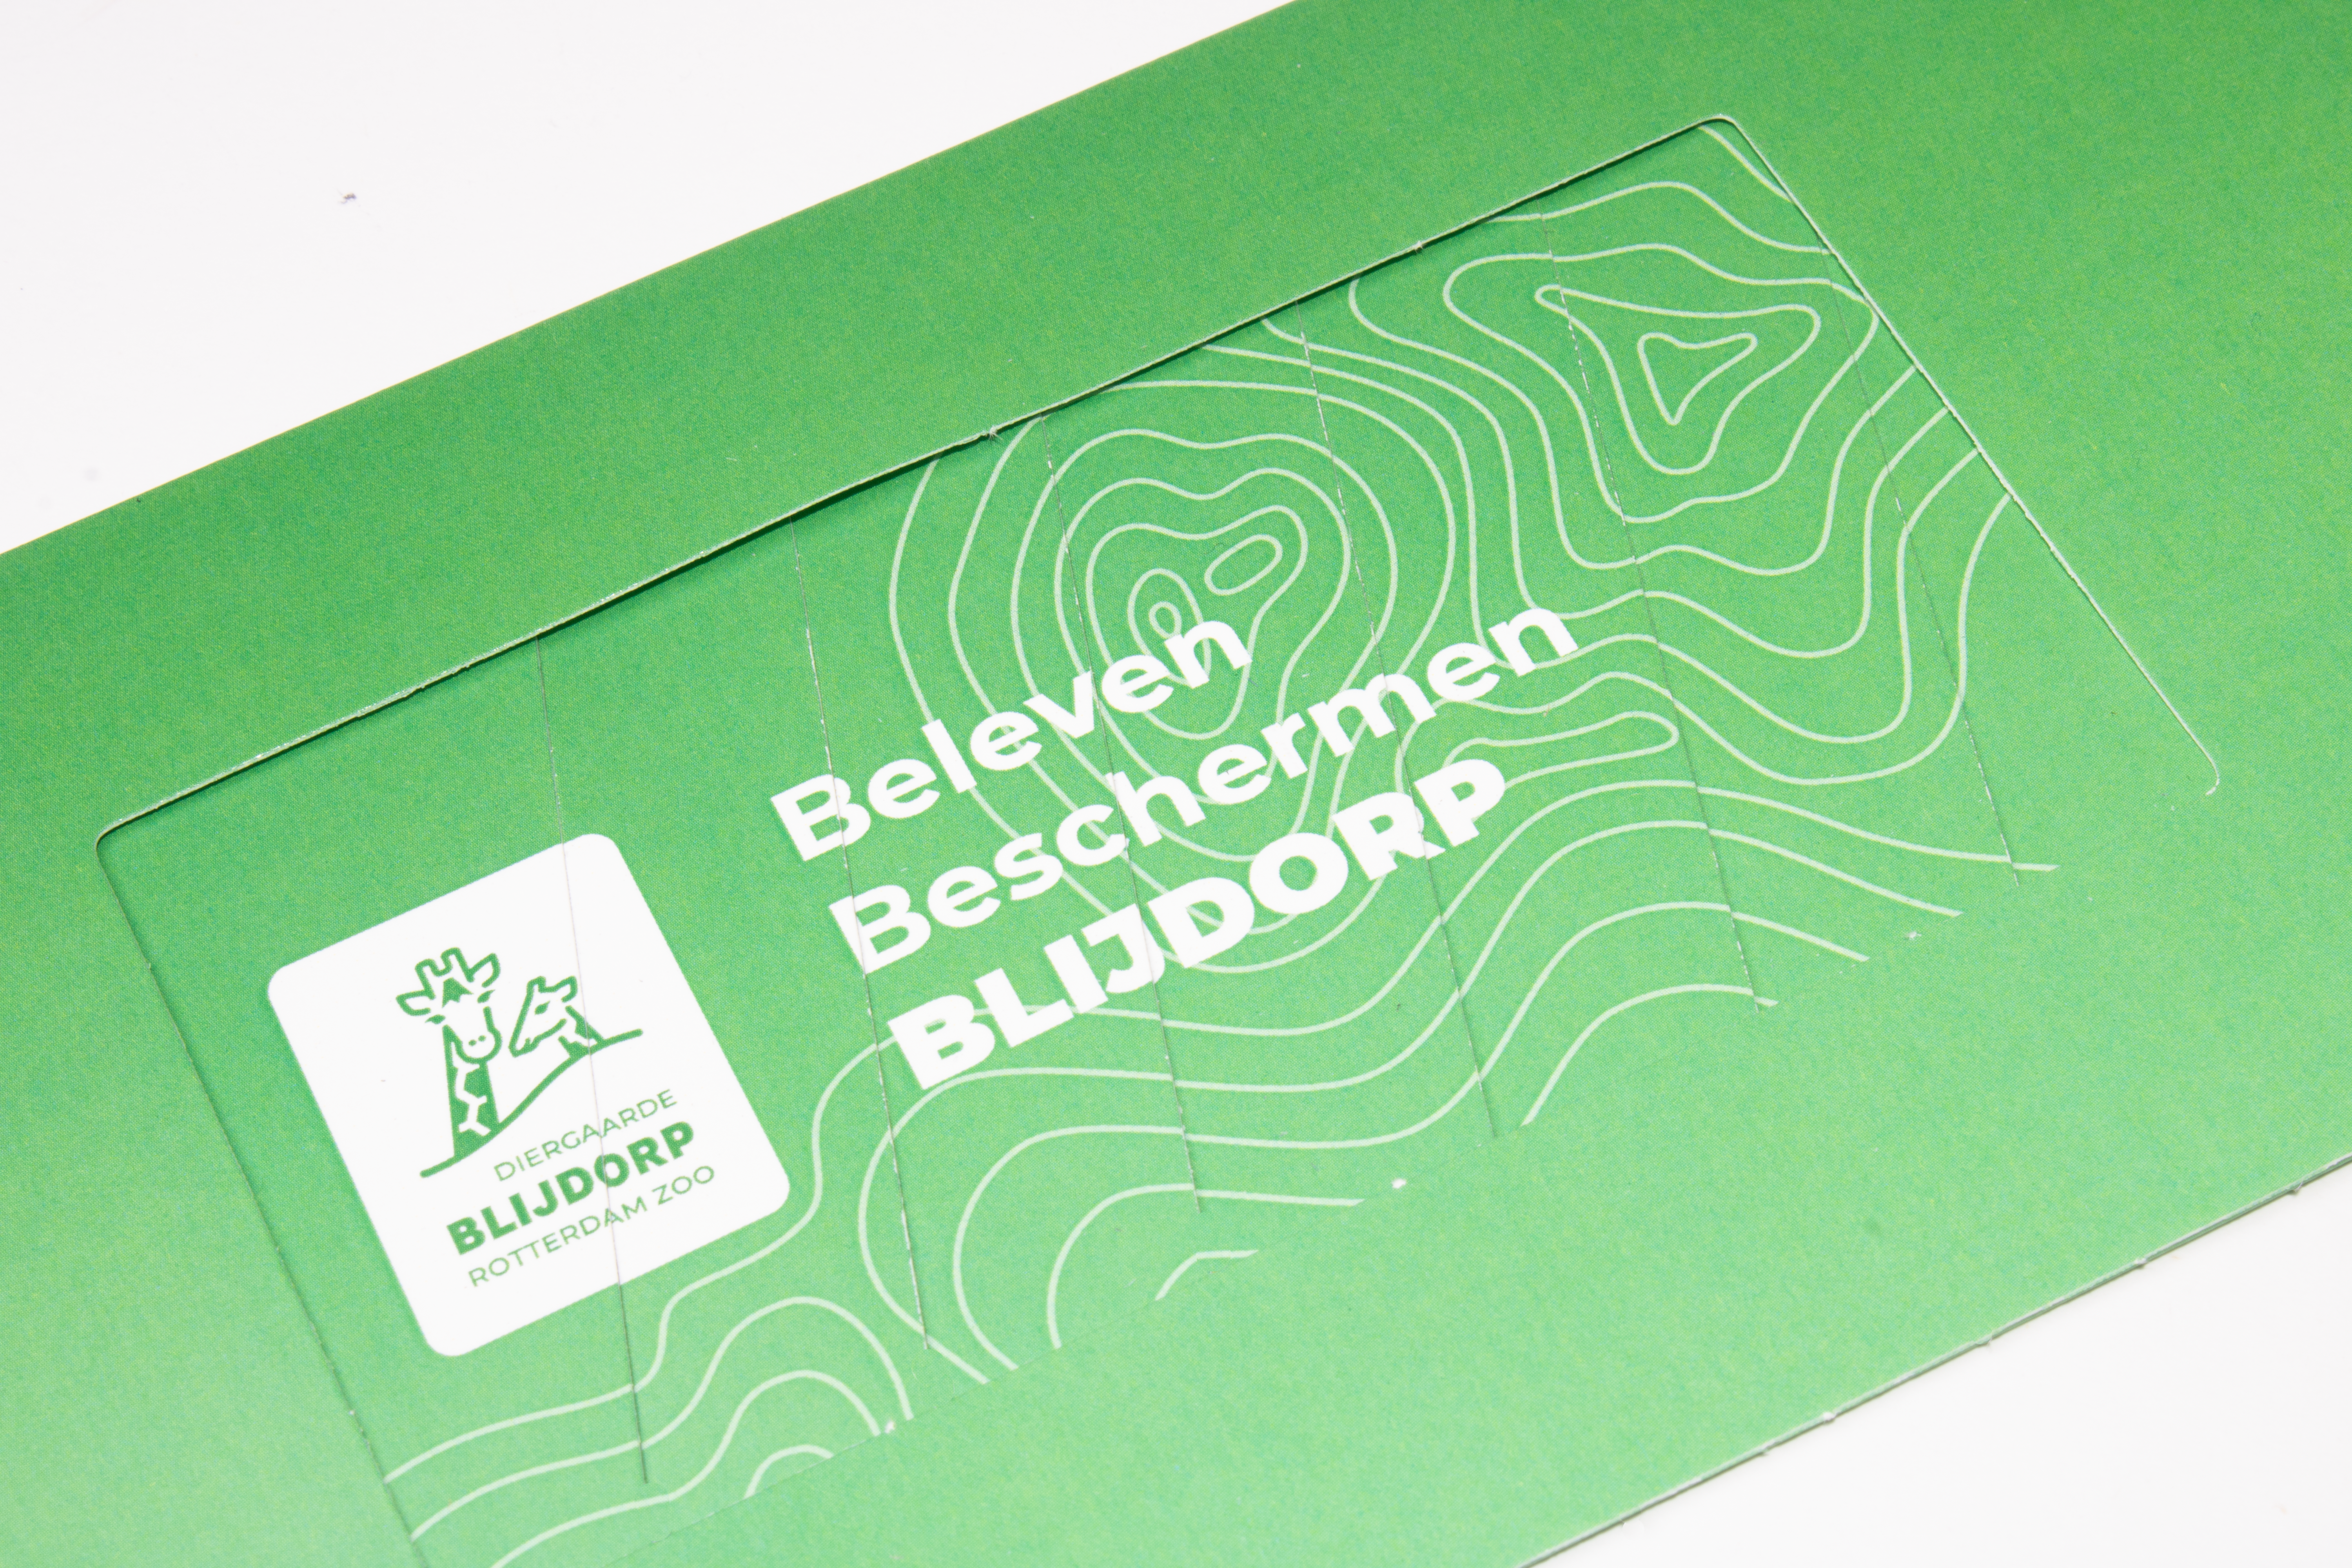 Quantes Grafimedia uses LocoMail's Changecard to introduce Blijdorp Zoo's mission and vision.